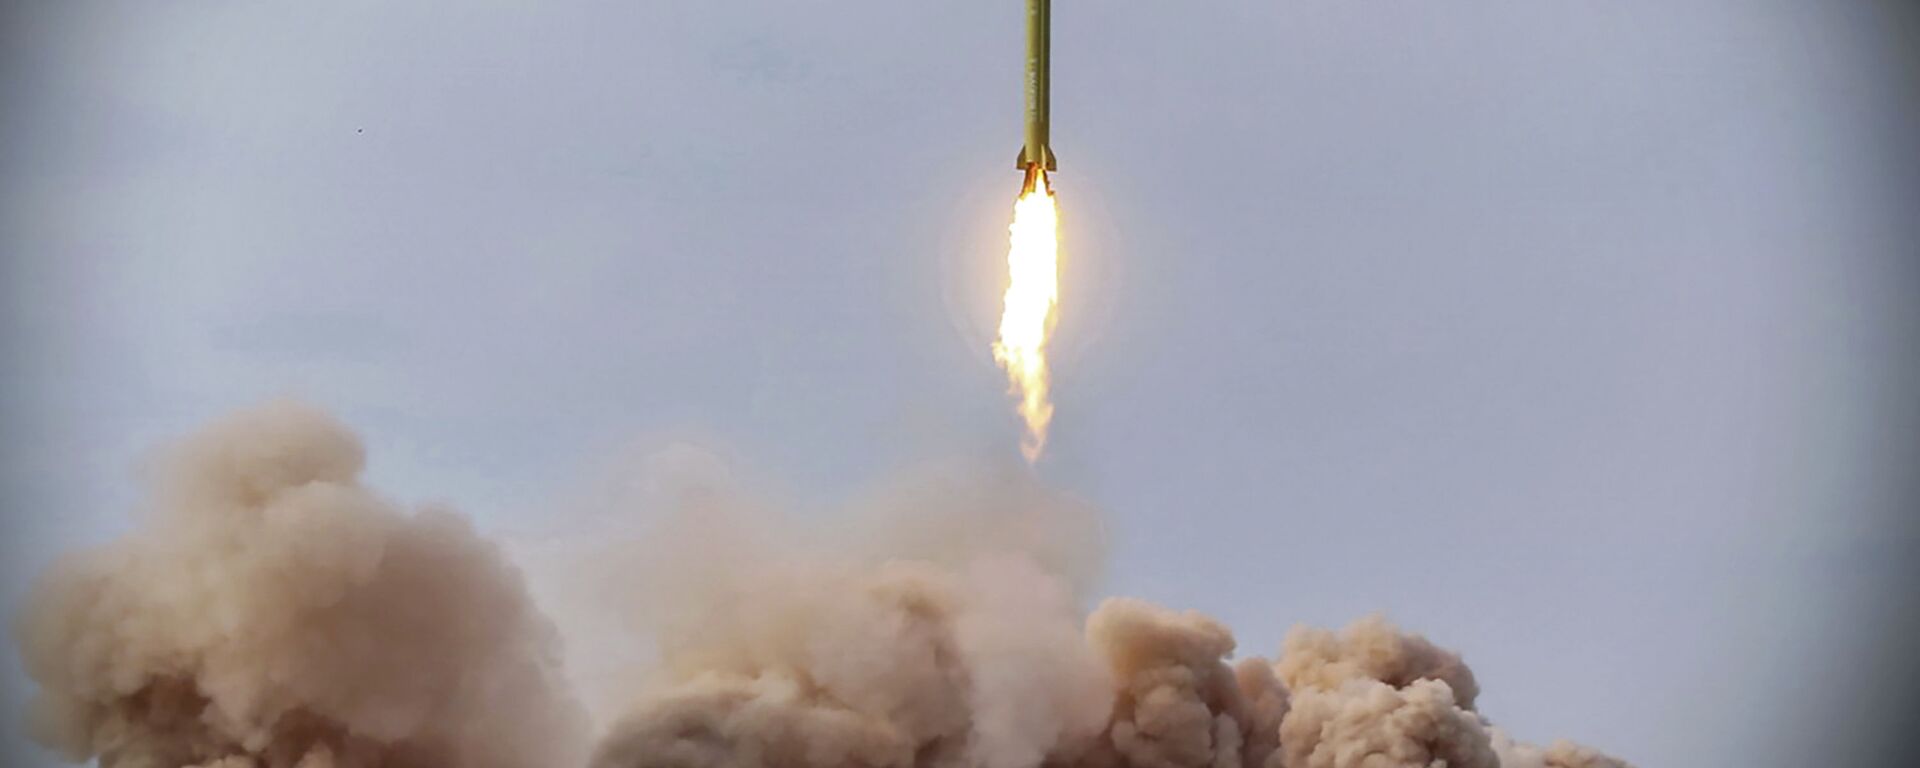 In this photo released on Saturday, Jan. 16, 2021, by the Iranian Revolutionary Guard, a missile is launched in a drill in Iran. Iran’s paramilitary Revolutionary Guard conducted a drill Saturday launching anti-warship ballistic missiles at a simulated target in the Indian Ocean, state television reported, amid heightened tensions over Tehran’s nuclear program and a U.S. pressure campaign against the Islamic Republic. - Sputnik International, 1920, 27.09.2021